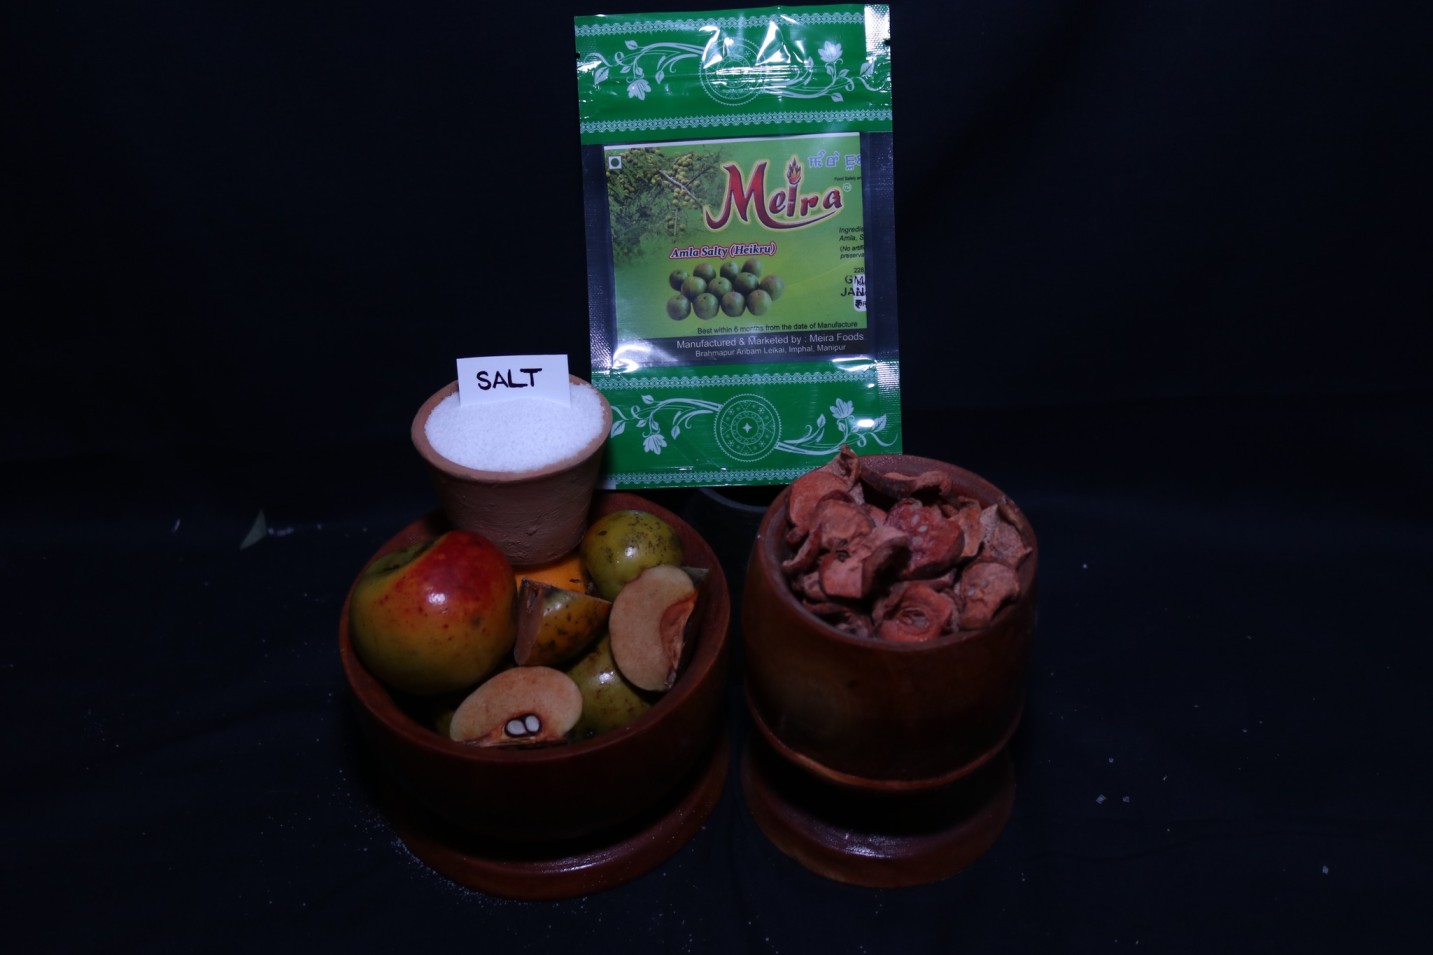 Products by Meira foods